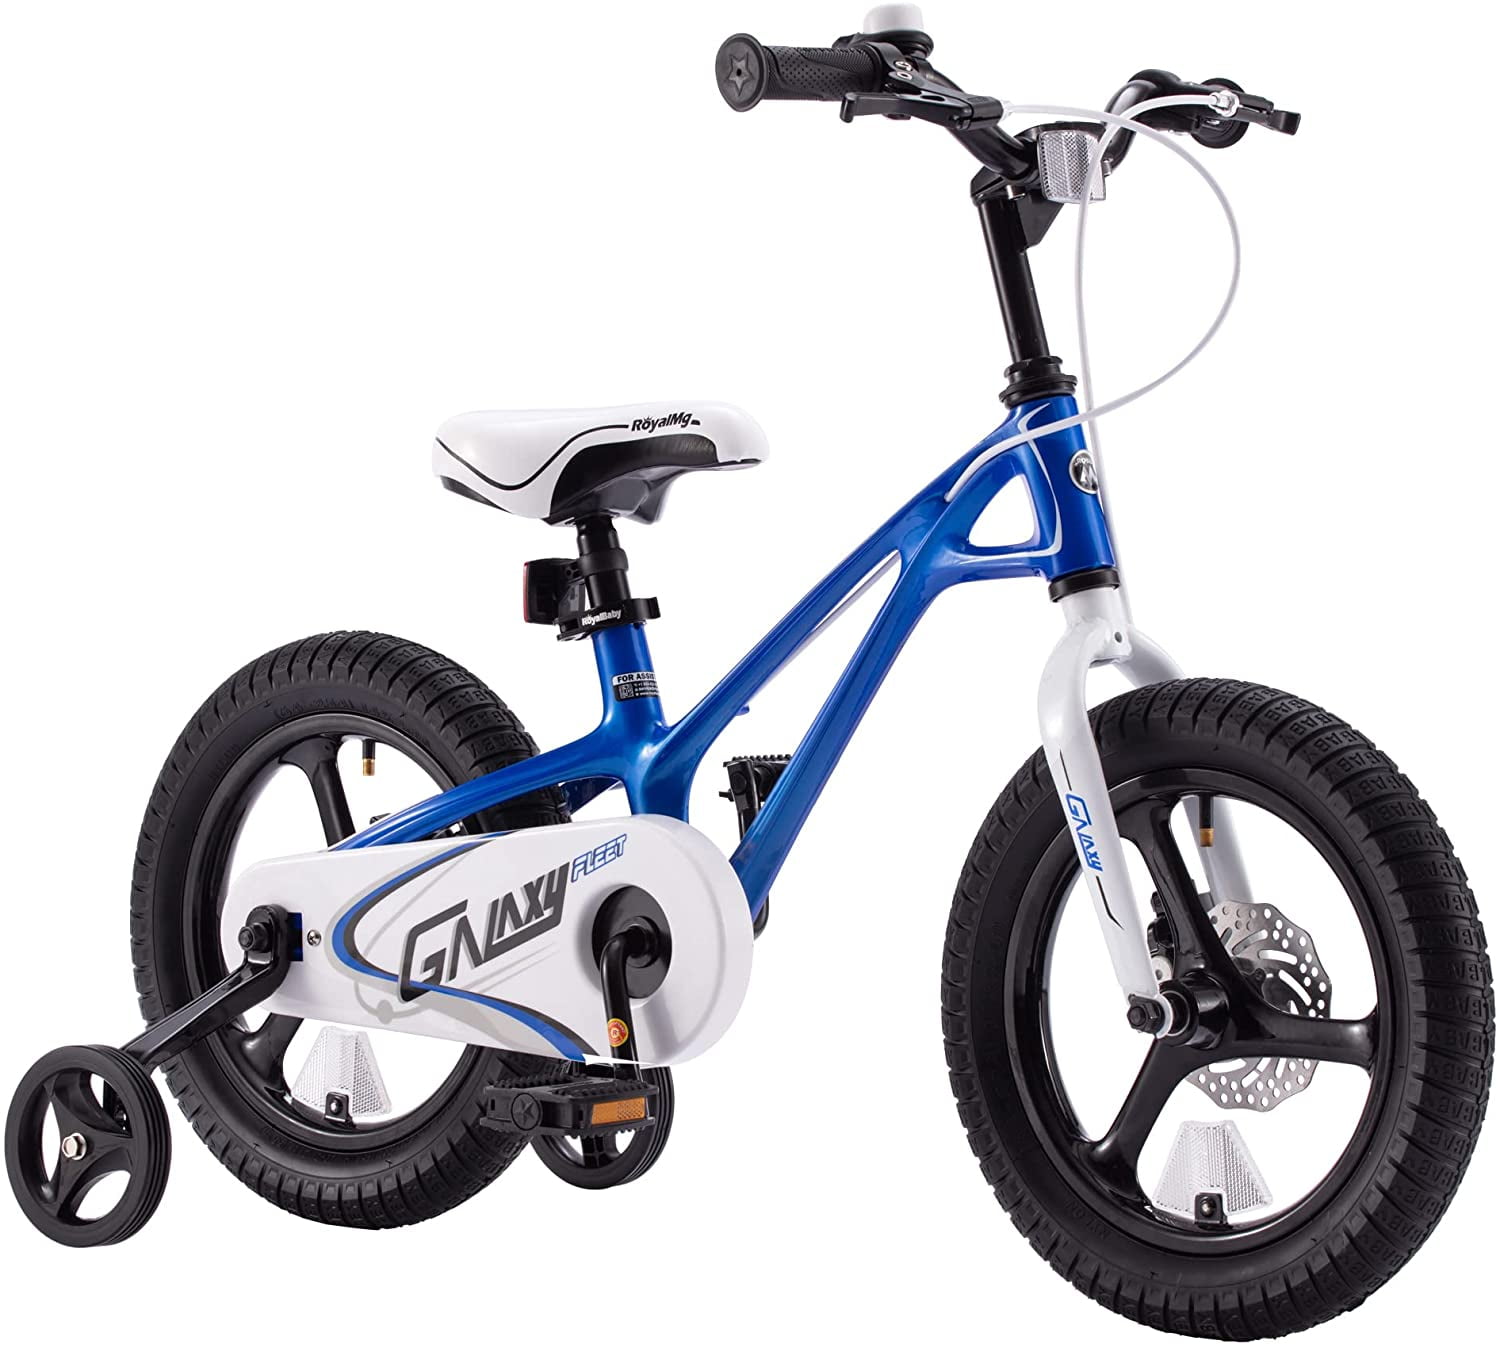 CHILDREN'S KIDS BIKE BICYCLE WITH REMOVABLE STABILISERS 12 INCH UK 